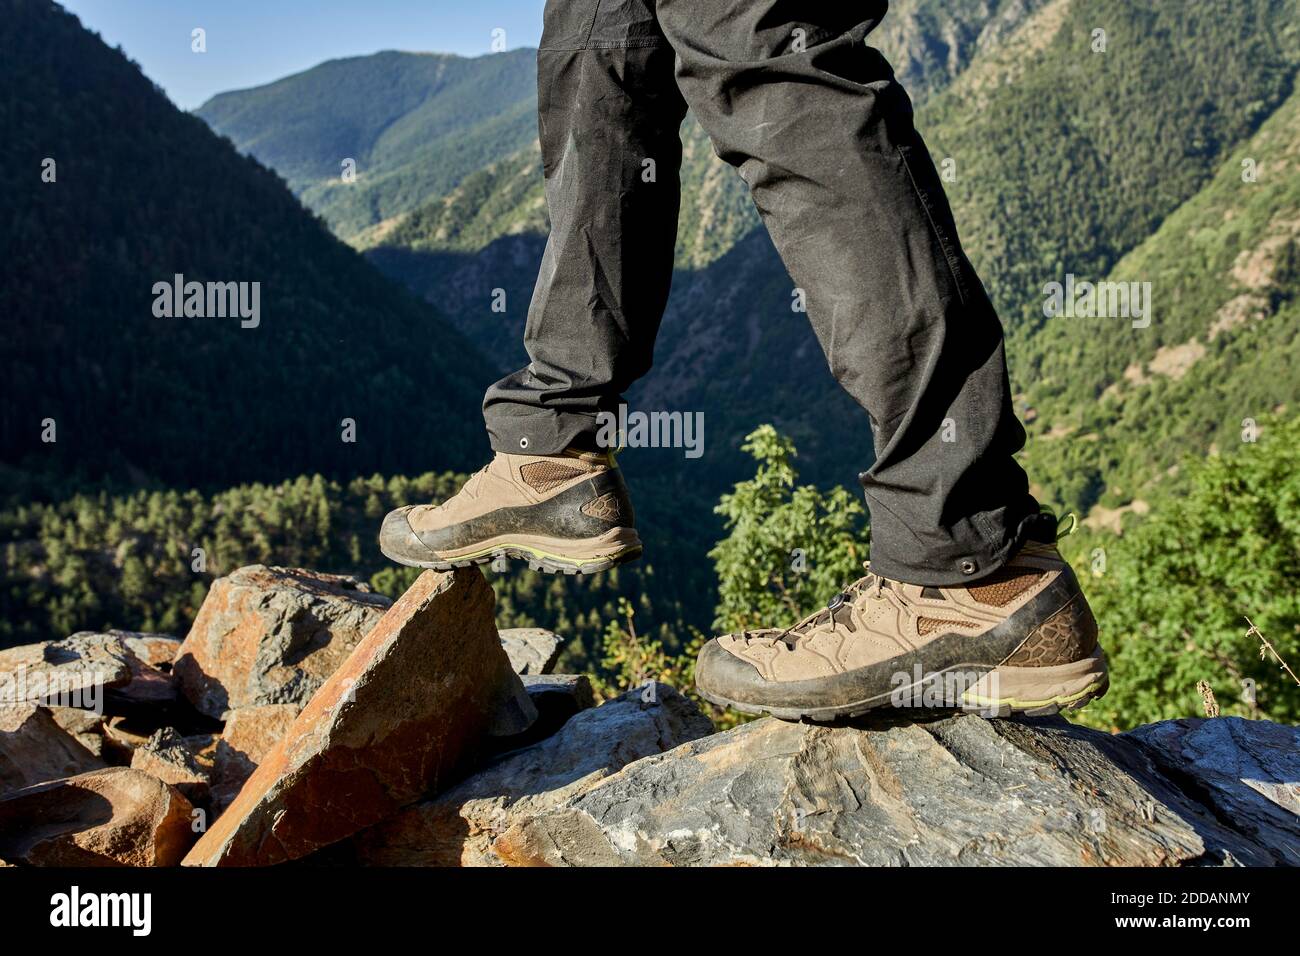 Legs of man wearing sports shoe standing on stone in forest Stock Photo